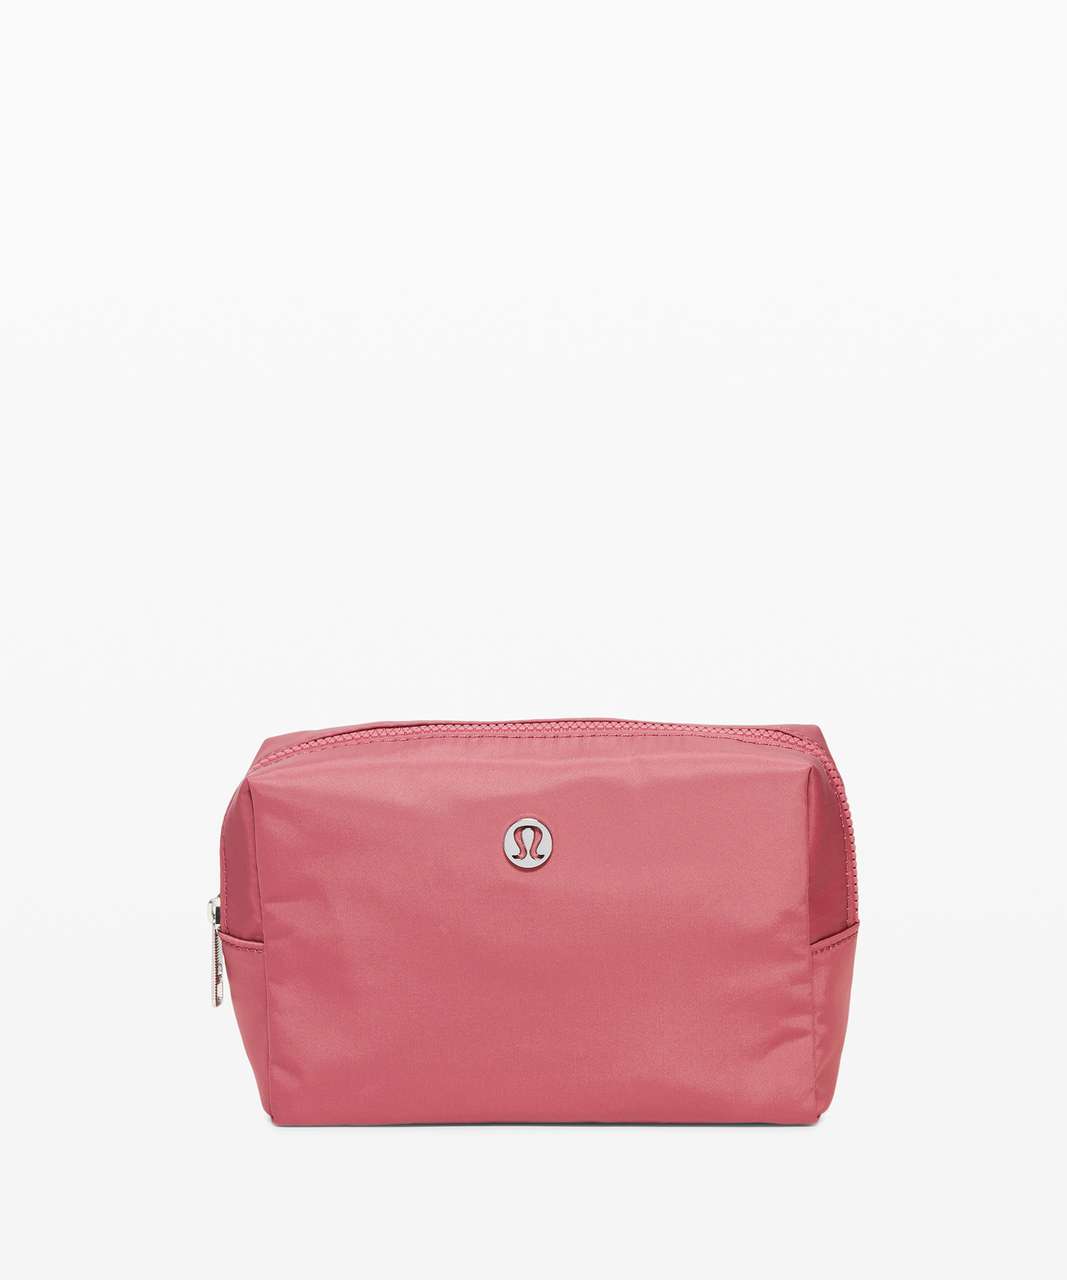 Lululemon All Your Small Things Pouch *Mini 2L - Cherry Tint